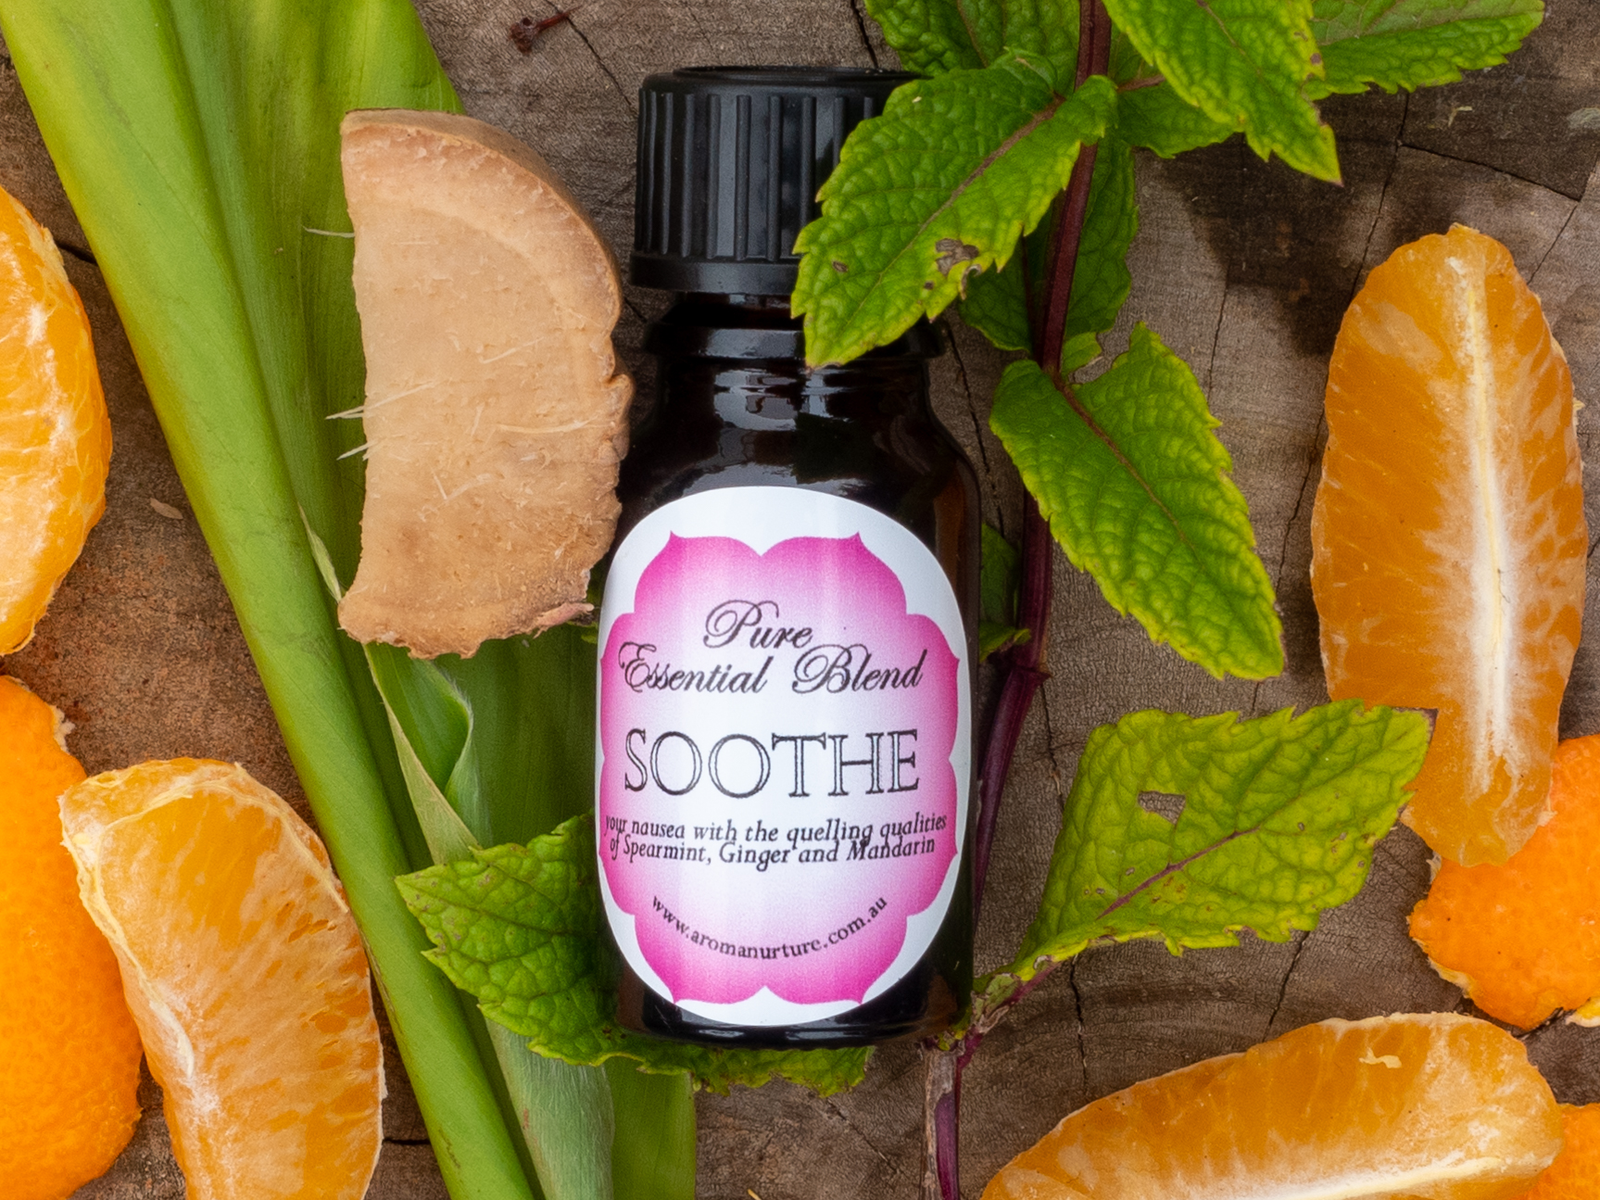 Soothe Pure Essential Oil blend